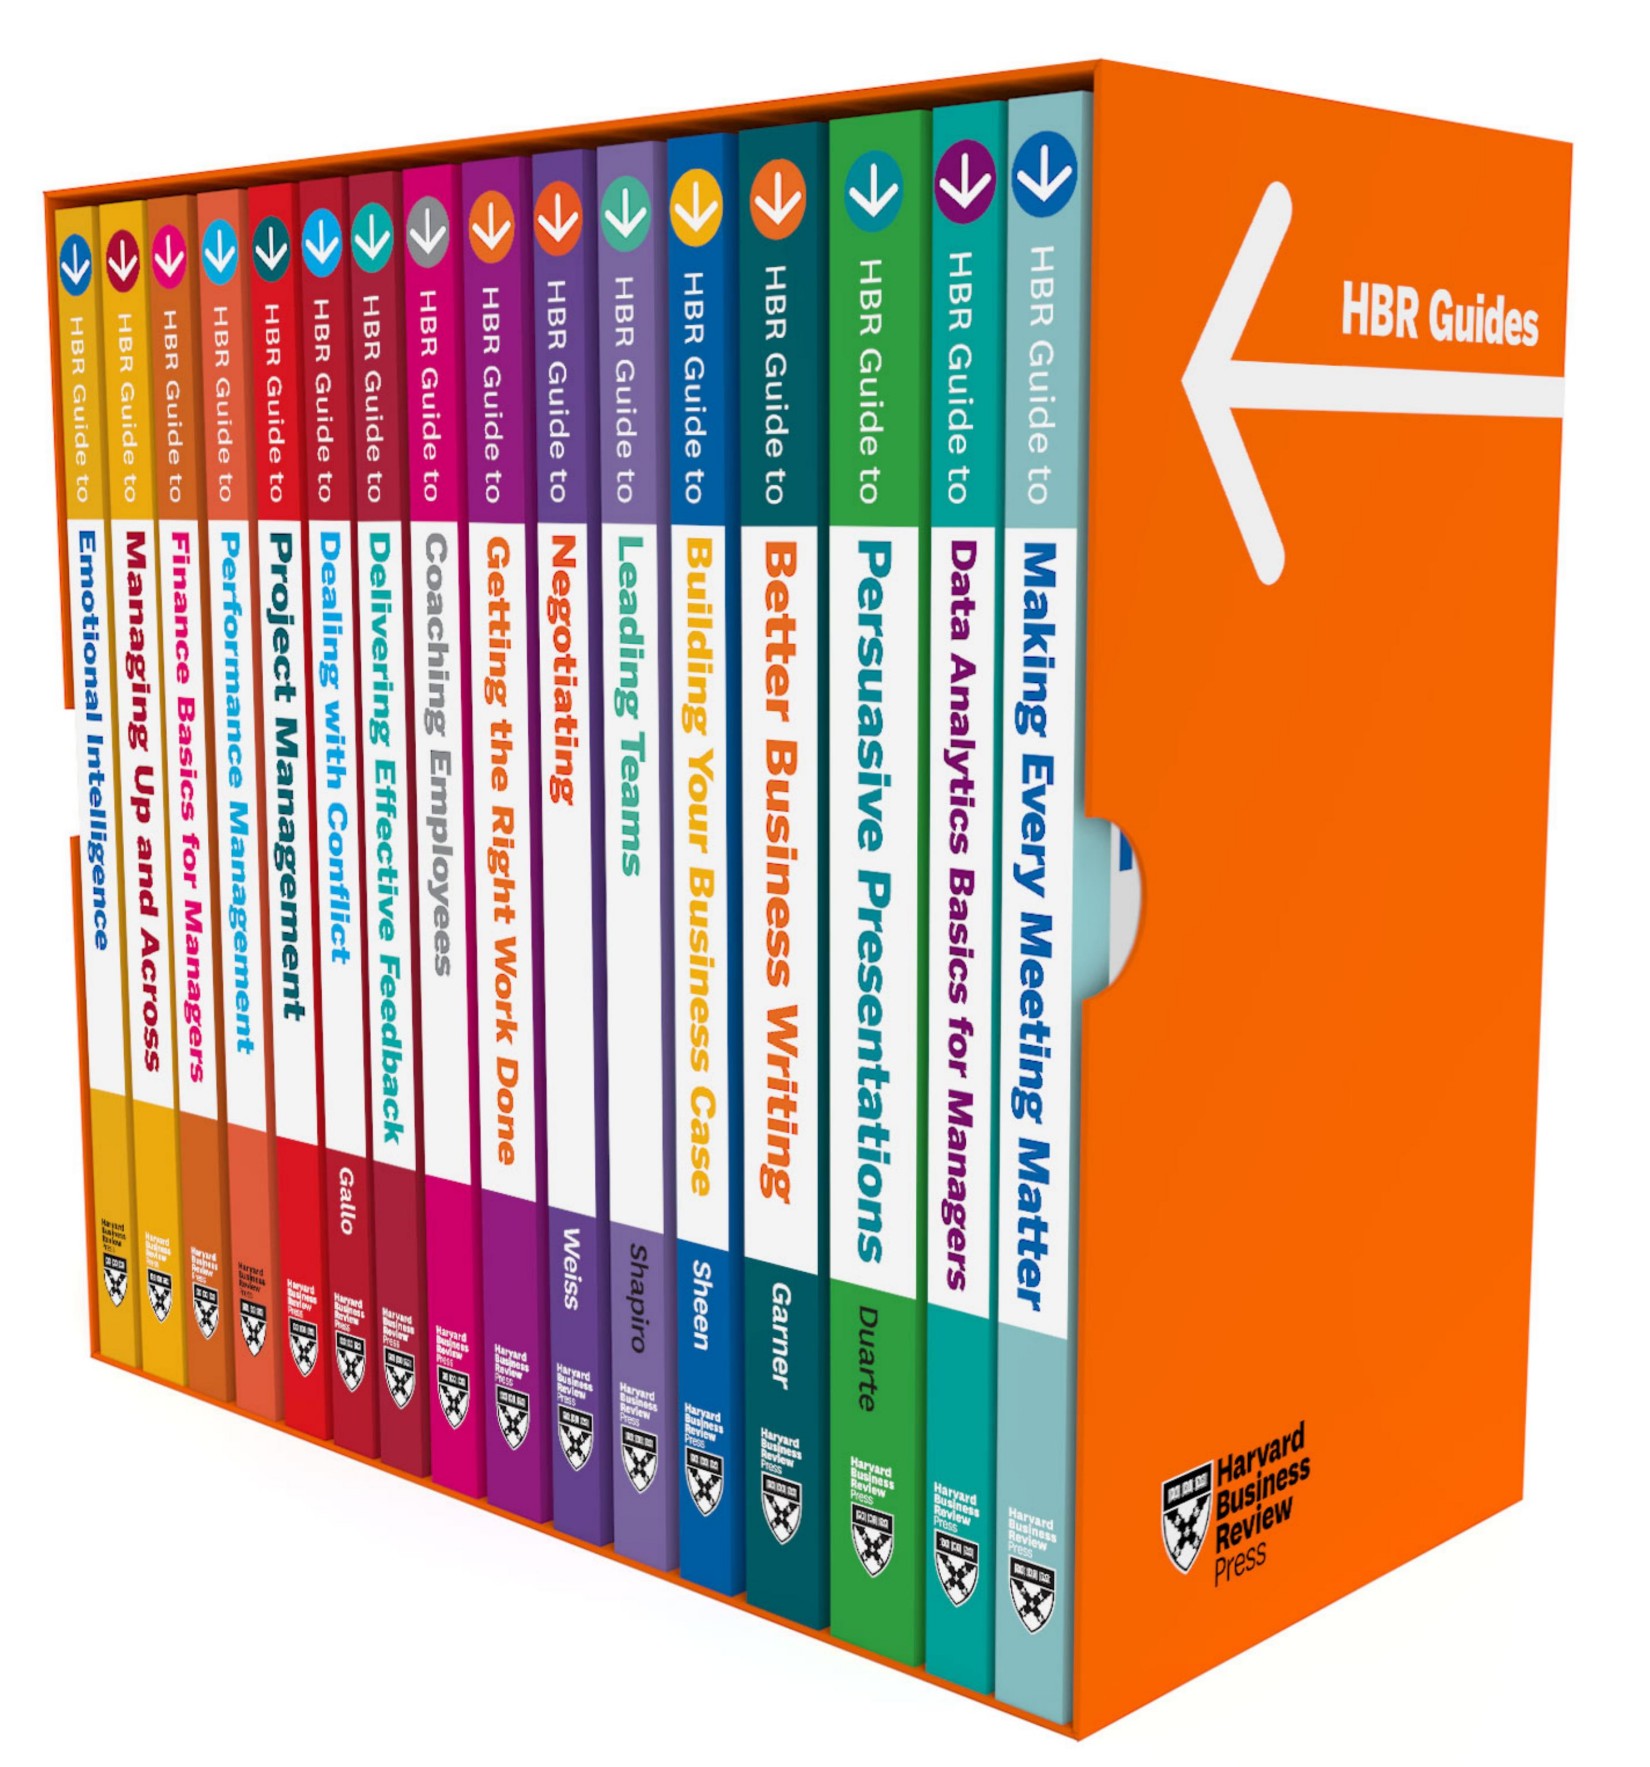 HBR Guides Ultimate Boxed Set (16 Books)